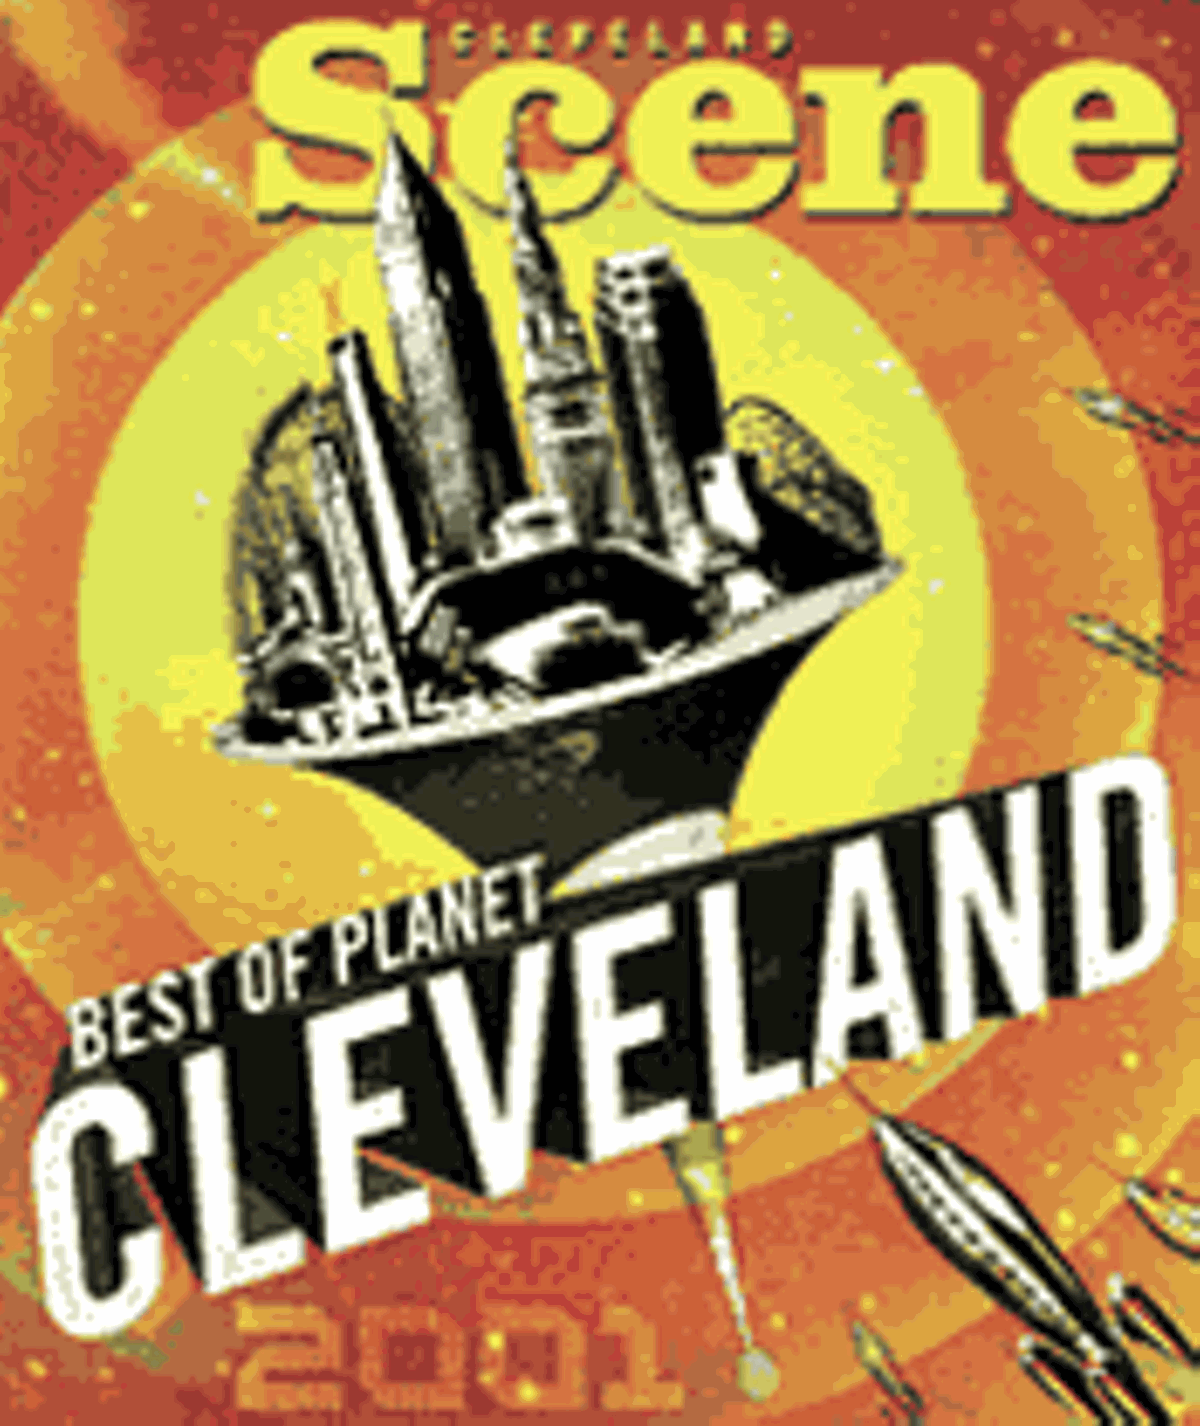 Best of Cleveland 2001 Issue Cover